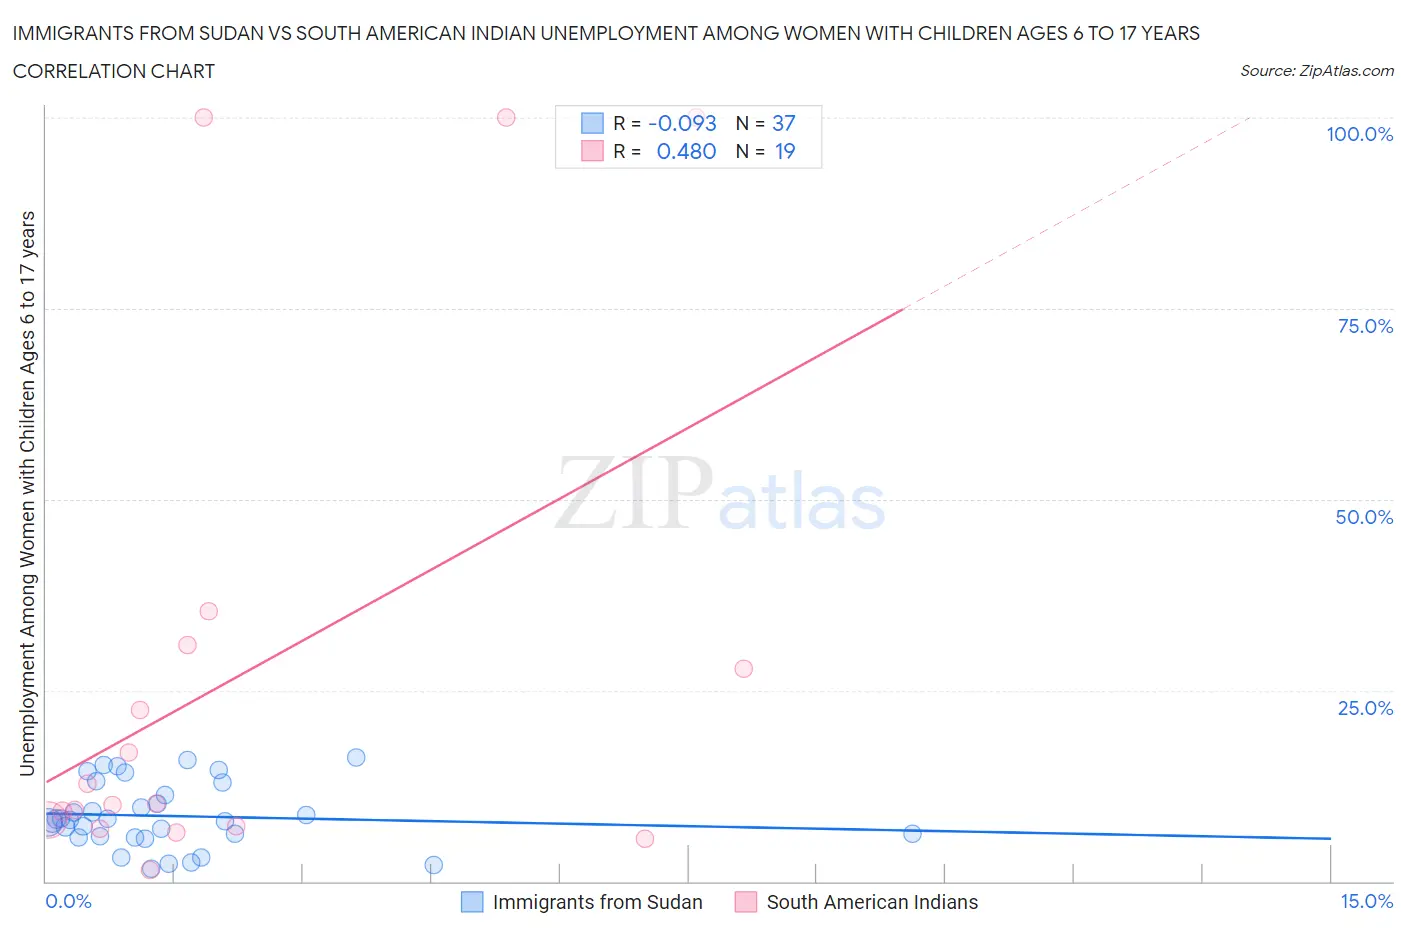 Immigrants from Sudan vs South American Indian Unemployment Among Women with Children Ages 6 to 17 years